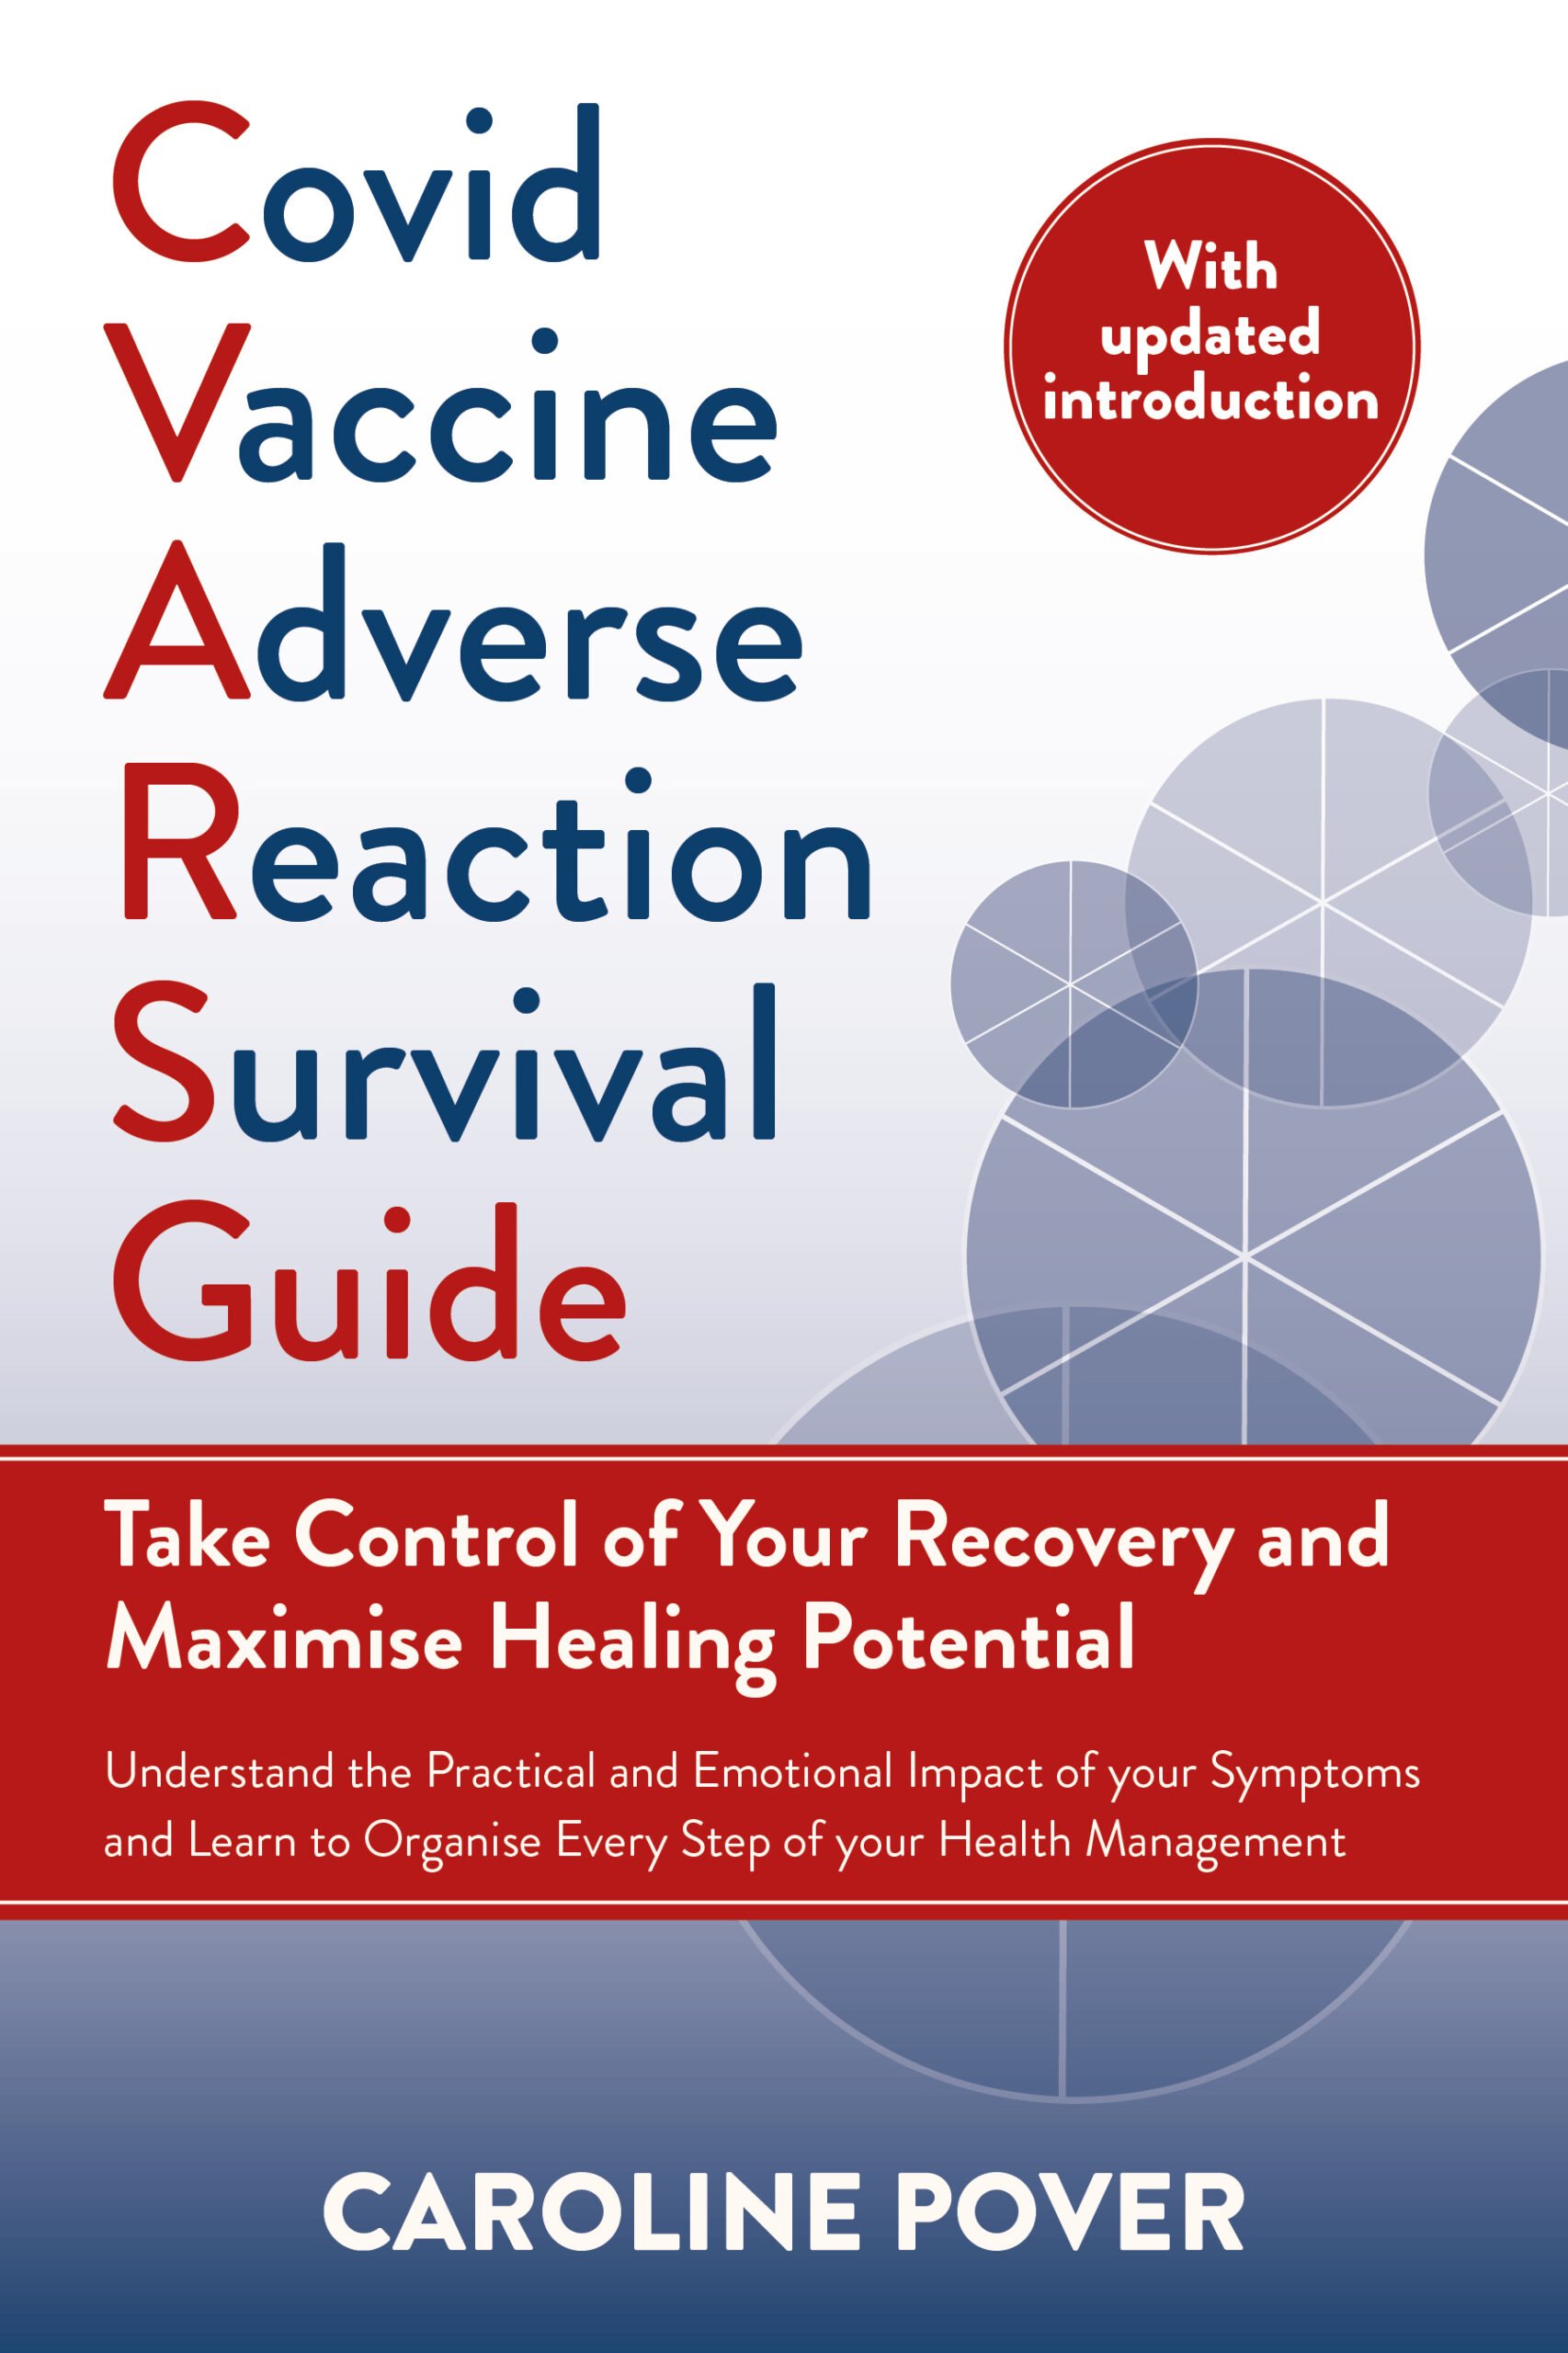 The Covid Vaccine Adverse Reaction Survival Guide cover